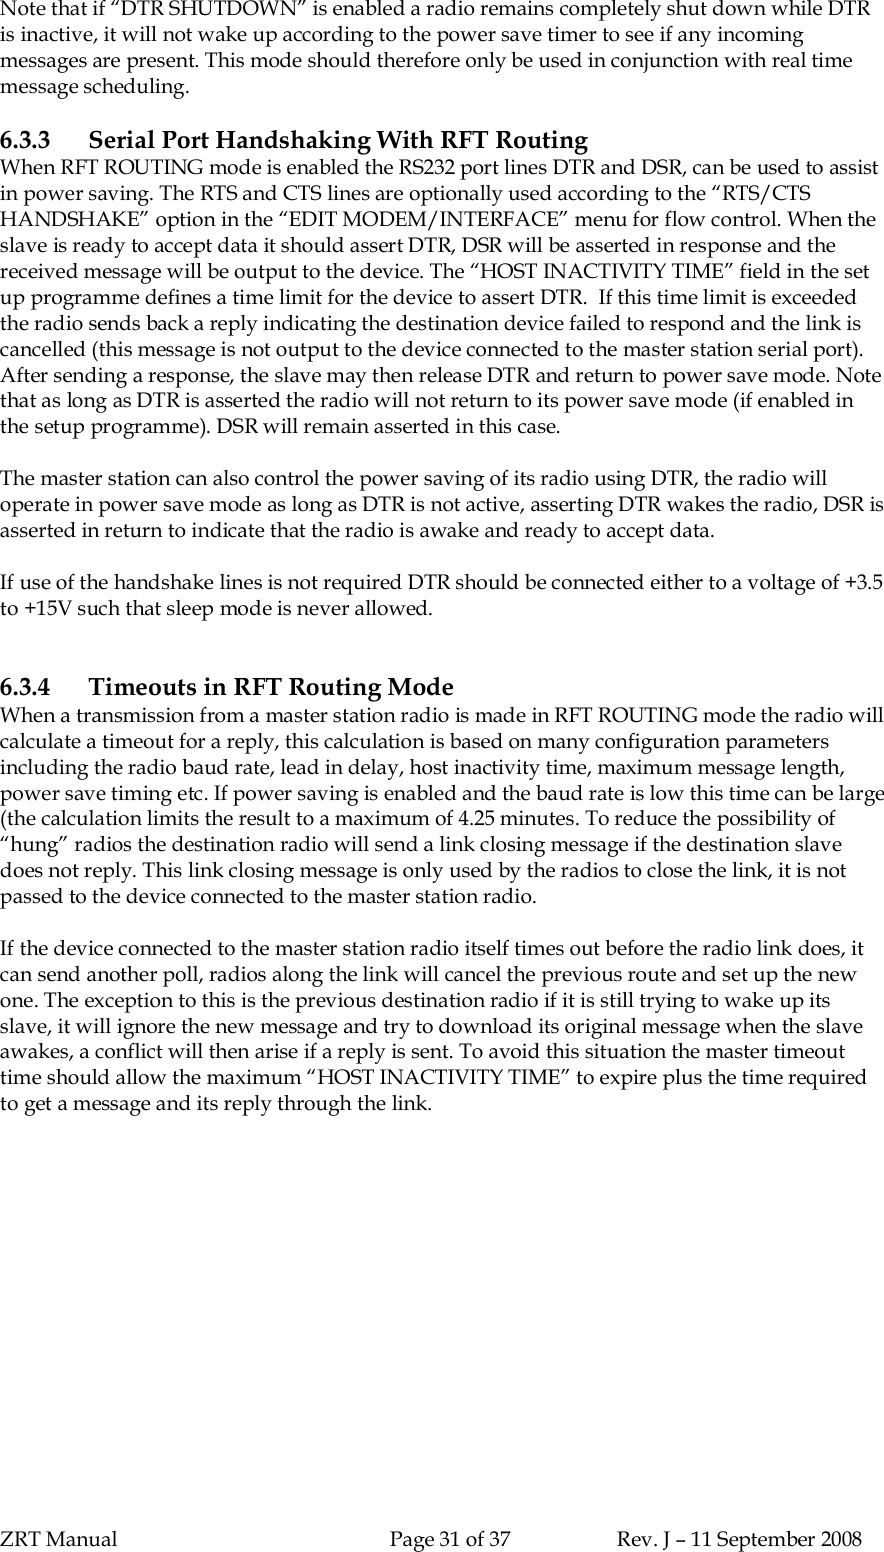 ZRT Manual Page 31 of 37 Rev. J – 11 September 2008Note that if “DTR SHUTDOWN” is enabled a radio remains completely shut down while DTRis inactive, it will not wake up according to the power save timer to see if any incomingmessages are present. This mode should therefore only be used in conjunction with real timemessage scheduling.6.3.3 Serial Port Handshaking With RFT RoutingWhen RFT ROUTING mode is enabled the RS232 port lines DTR and DSR, can be used to assistin power saving. The RTS and CTS lines are optionally used according to the “RTS/CTSHANDSHAKE” option in the “EDIT MODEM/INTERFACE” menu for flow control. When theslave is ready to accept data it should assert DTR, DSR will be asserted in response and thereceived message will be output to the device. The “HOST INACTIVITY TIME” field in the setup programme defines a time limit for the device to assert DTR.  If this time limit is exceededthe radio sends back a reply indicating the destination device failed to respond and the link iscancelled (this message is not output to the device connected to the master station serial port).After sending a response, the slave may then release DTR and return to power save mode. Notethat as long as DTR is asserted the radio will not return to its power save mode (if enabled inthe setup programme). DSR will remain asserted in this case.The master station can also control the power saving of its radio using DTR, the radio willoperate in power save mode as long as DTR is not active, asserting DTR wakes the radio, DSR isasserted in return to indicate that the radio is awake and ready to accept data.If use of the handshake lines is not required DTR should be connected either to a voltage of +3.5to +15V such that sleep mode is never allowed.6.3.4 Timeouts in RFT Routing ModeWhen a transmission from a master station radio is made in RFT ROUTING mode the radio willcalculate a timeout for a reply, this calculation is based on many configuration parametersincluding the radio baud rate, lead in delay, host inactivity time, maximum message length,power save timing etc. If power saving is enabled and the baud rate is low this time can be large(the calculation limits the result to a maximum of 4.25 minutes. To reduce the possibility of“hung” radios the destination radio will send a link closing message if the destination slavedoes not reply. This link closing message is only used by the radios to close the link, it is notpassed to the device connected to the master station radio.If the device connected to the master station radio itself times out before the radio link does, itcan send another poll, radios along the link will cancel the previous route and set up the newone. The exception to this is the previous destination radio if it is still trying to wake up itsslave, it will ignore the new message and try to download its original message when the slaveawakes, a conflict will then arise if a reply is sent. To avoid this situation the master timeouttime should allow the maximum “HOST INACTIVITY TIME” to expire plus the time requiredto get a message and its reply through the link.